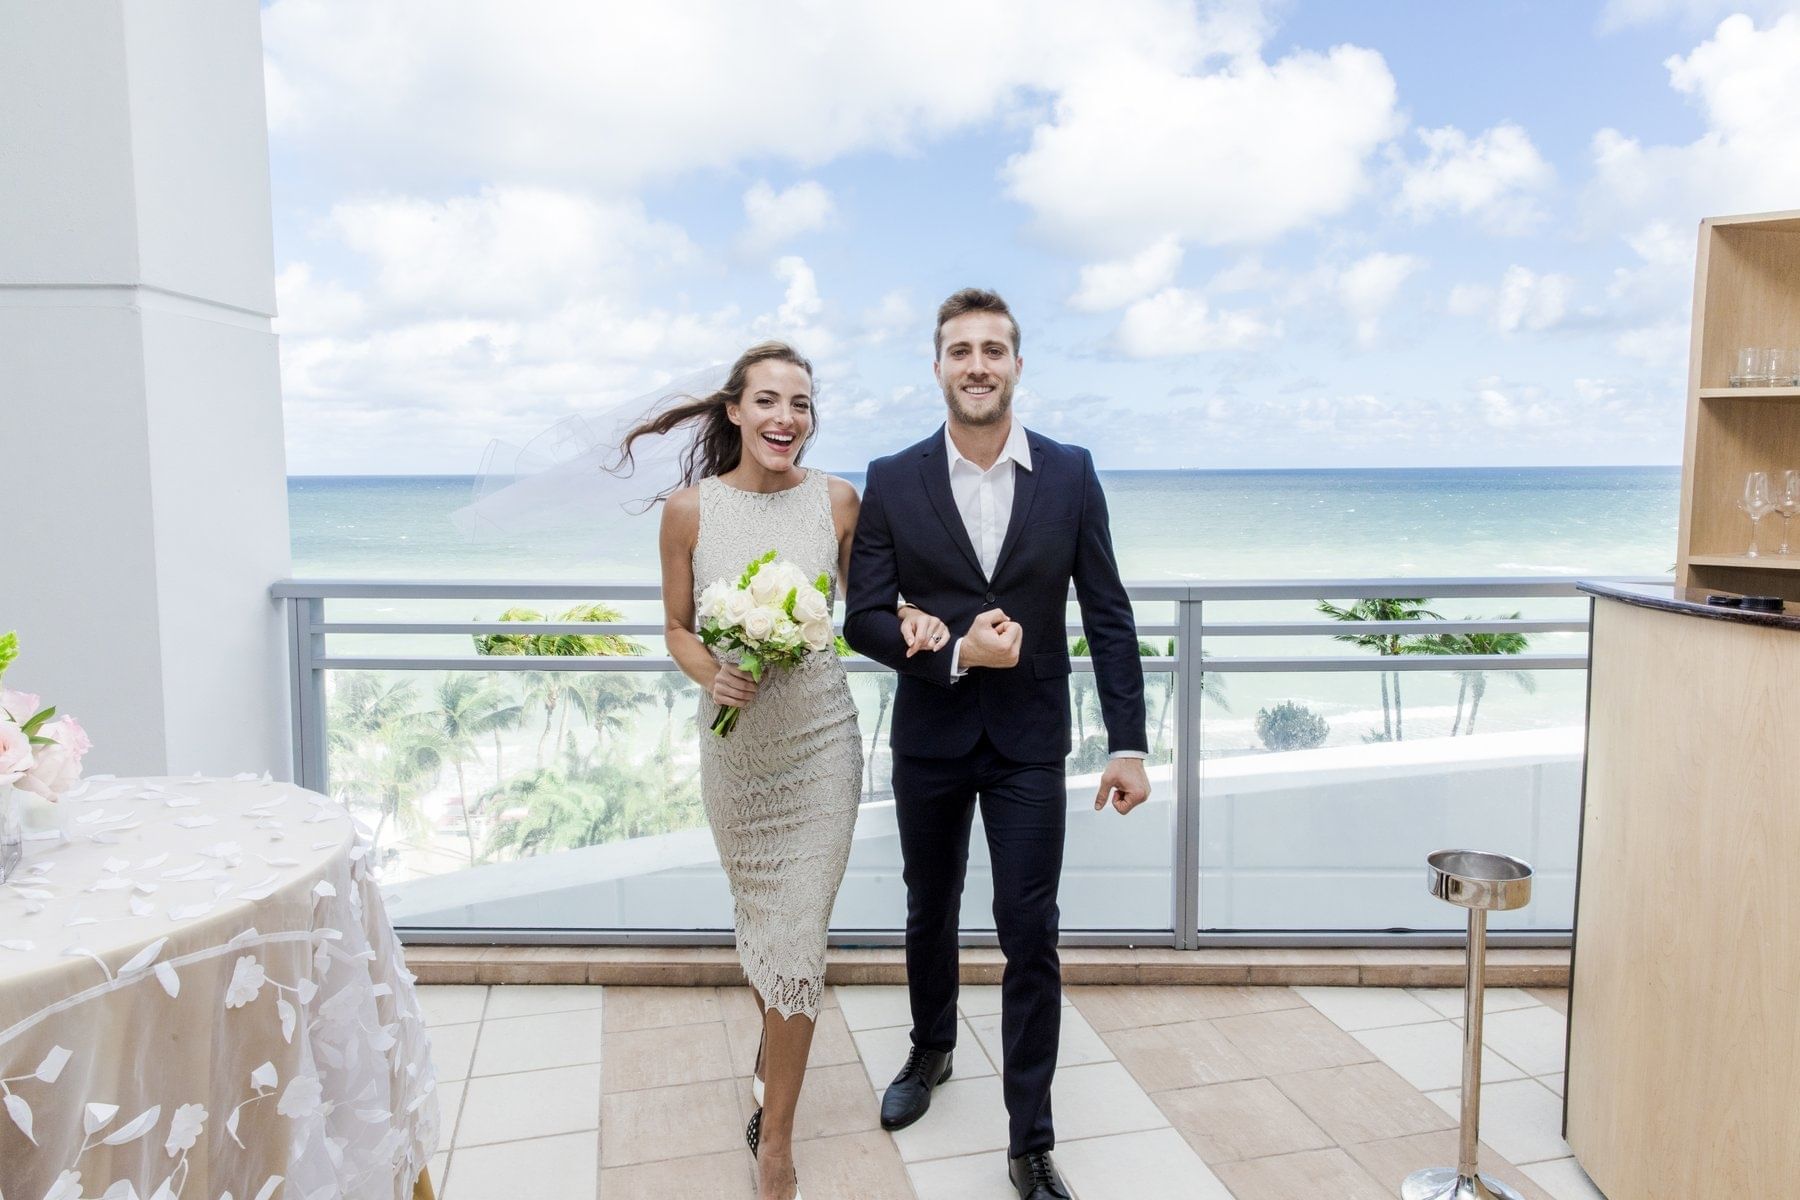 Bride & Groom posing on the balcony at The Diplomat Resort